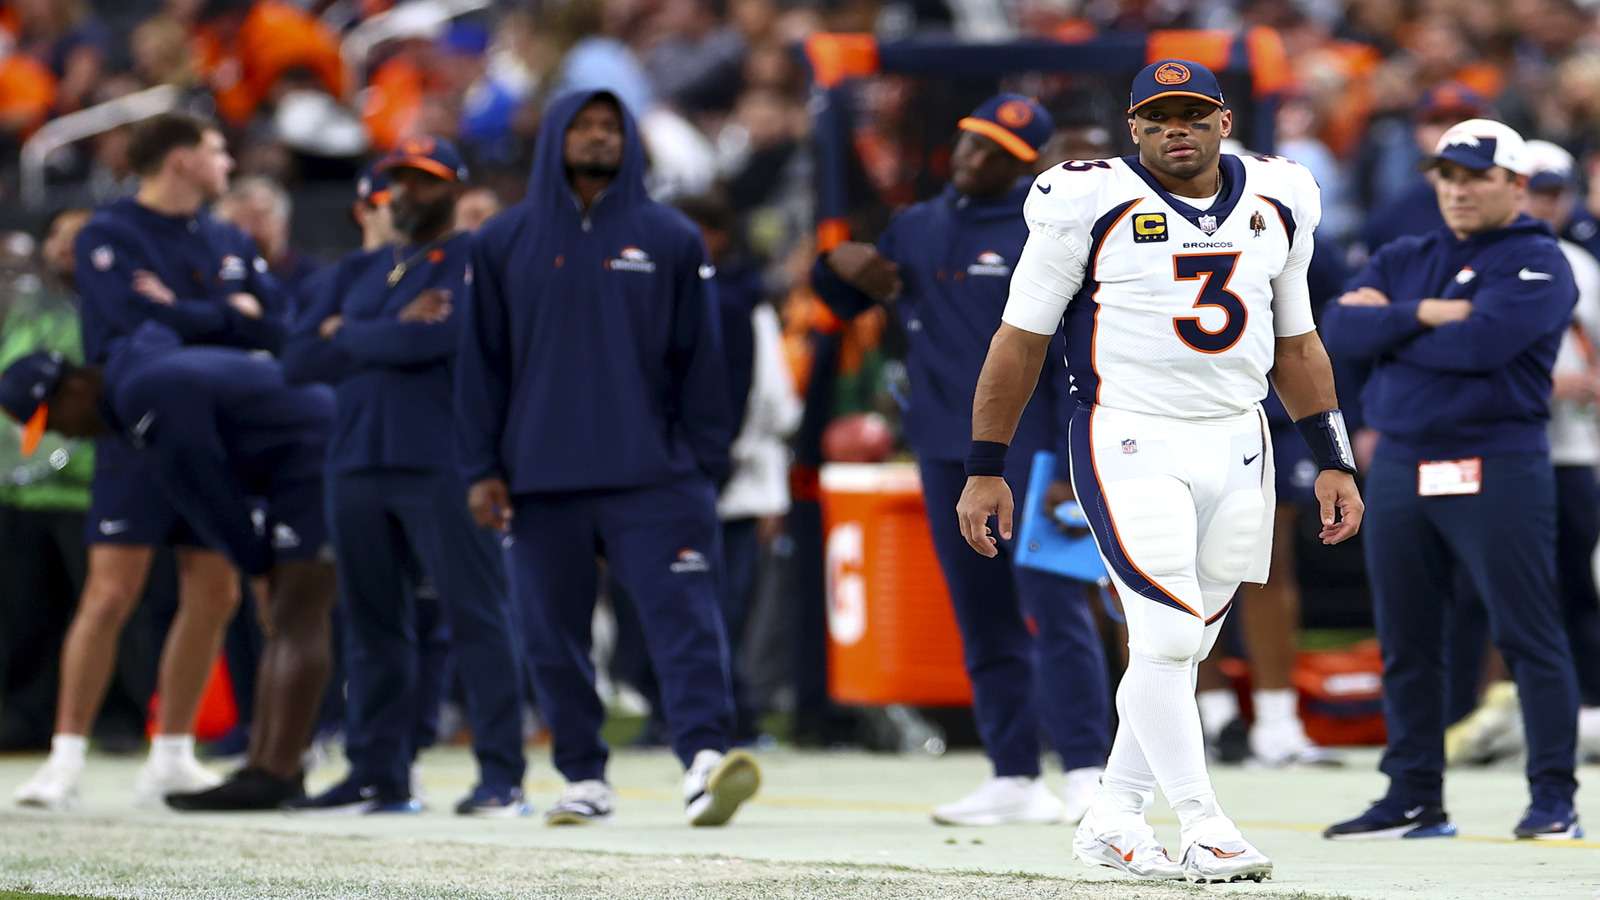 The Denver Broncos are releasing Russell Wilson, paving the way for Wilson to become a free agent